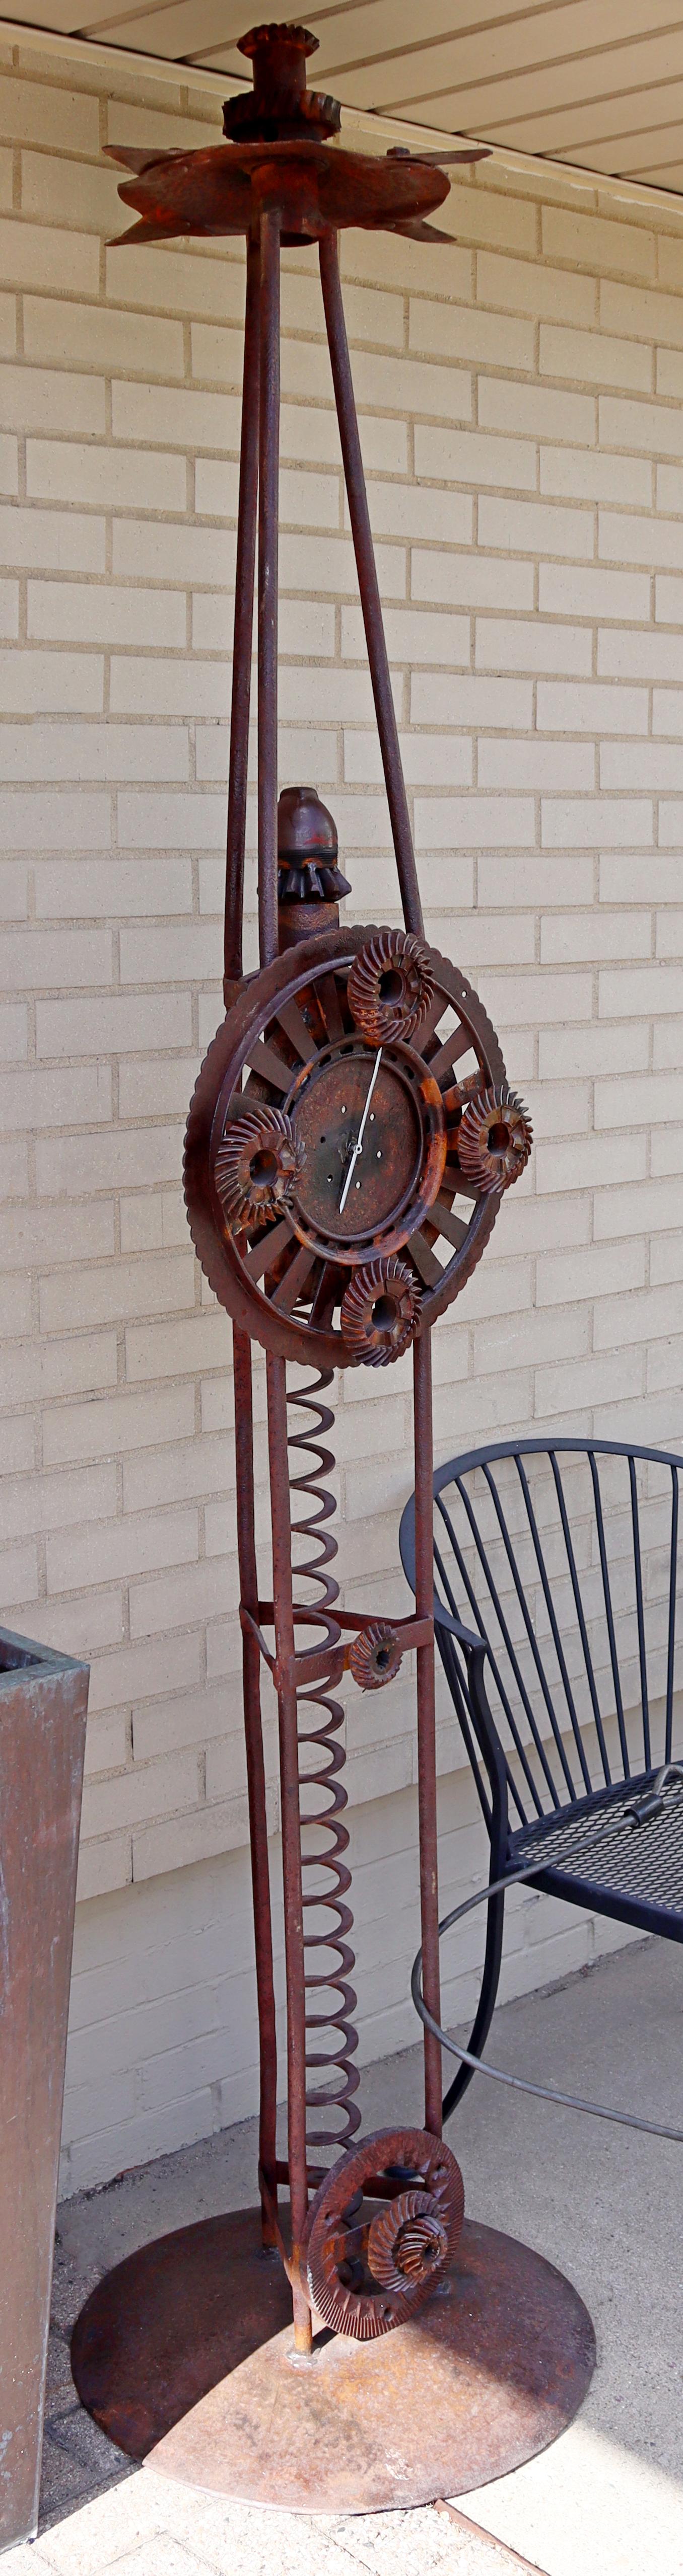 For your consideration is an incredible, abstract, outdoor floor sculpture, with a working clock. In excellent condition. The dimensions are 20